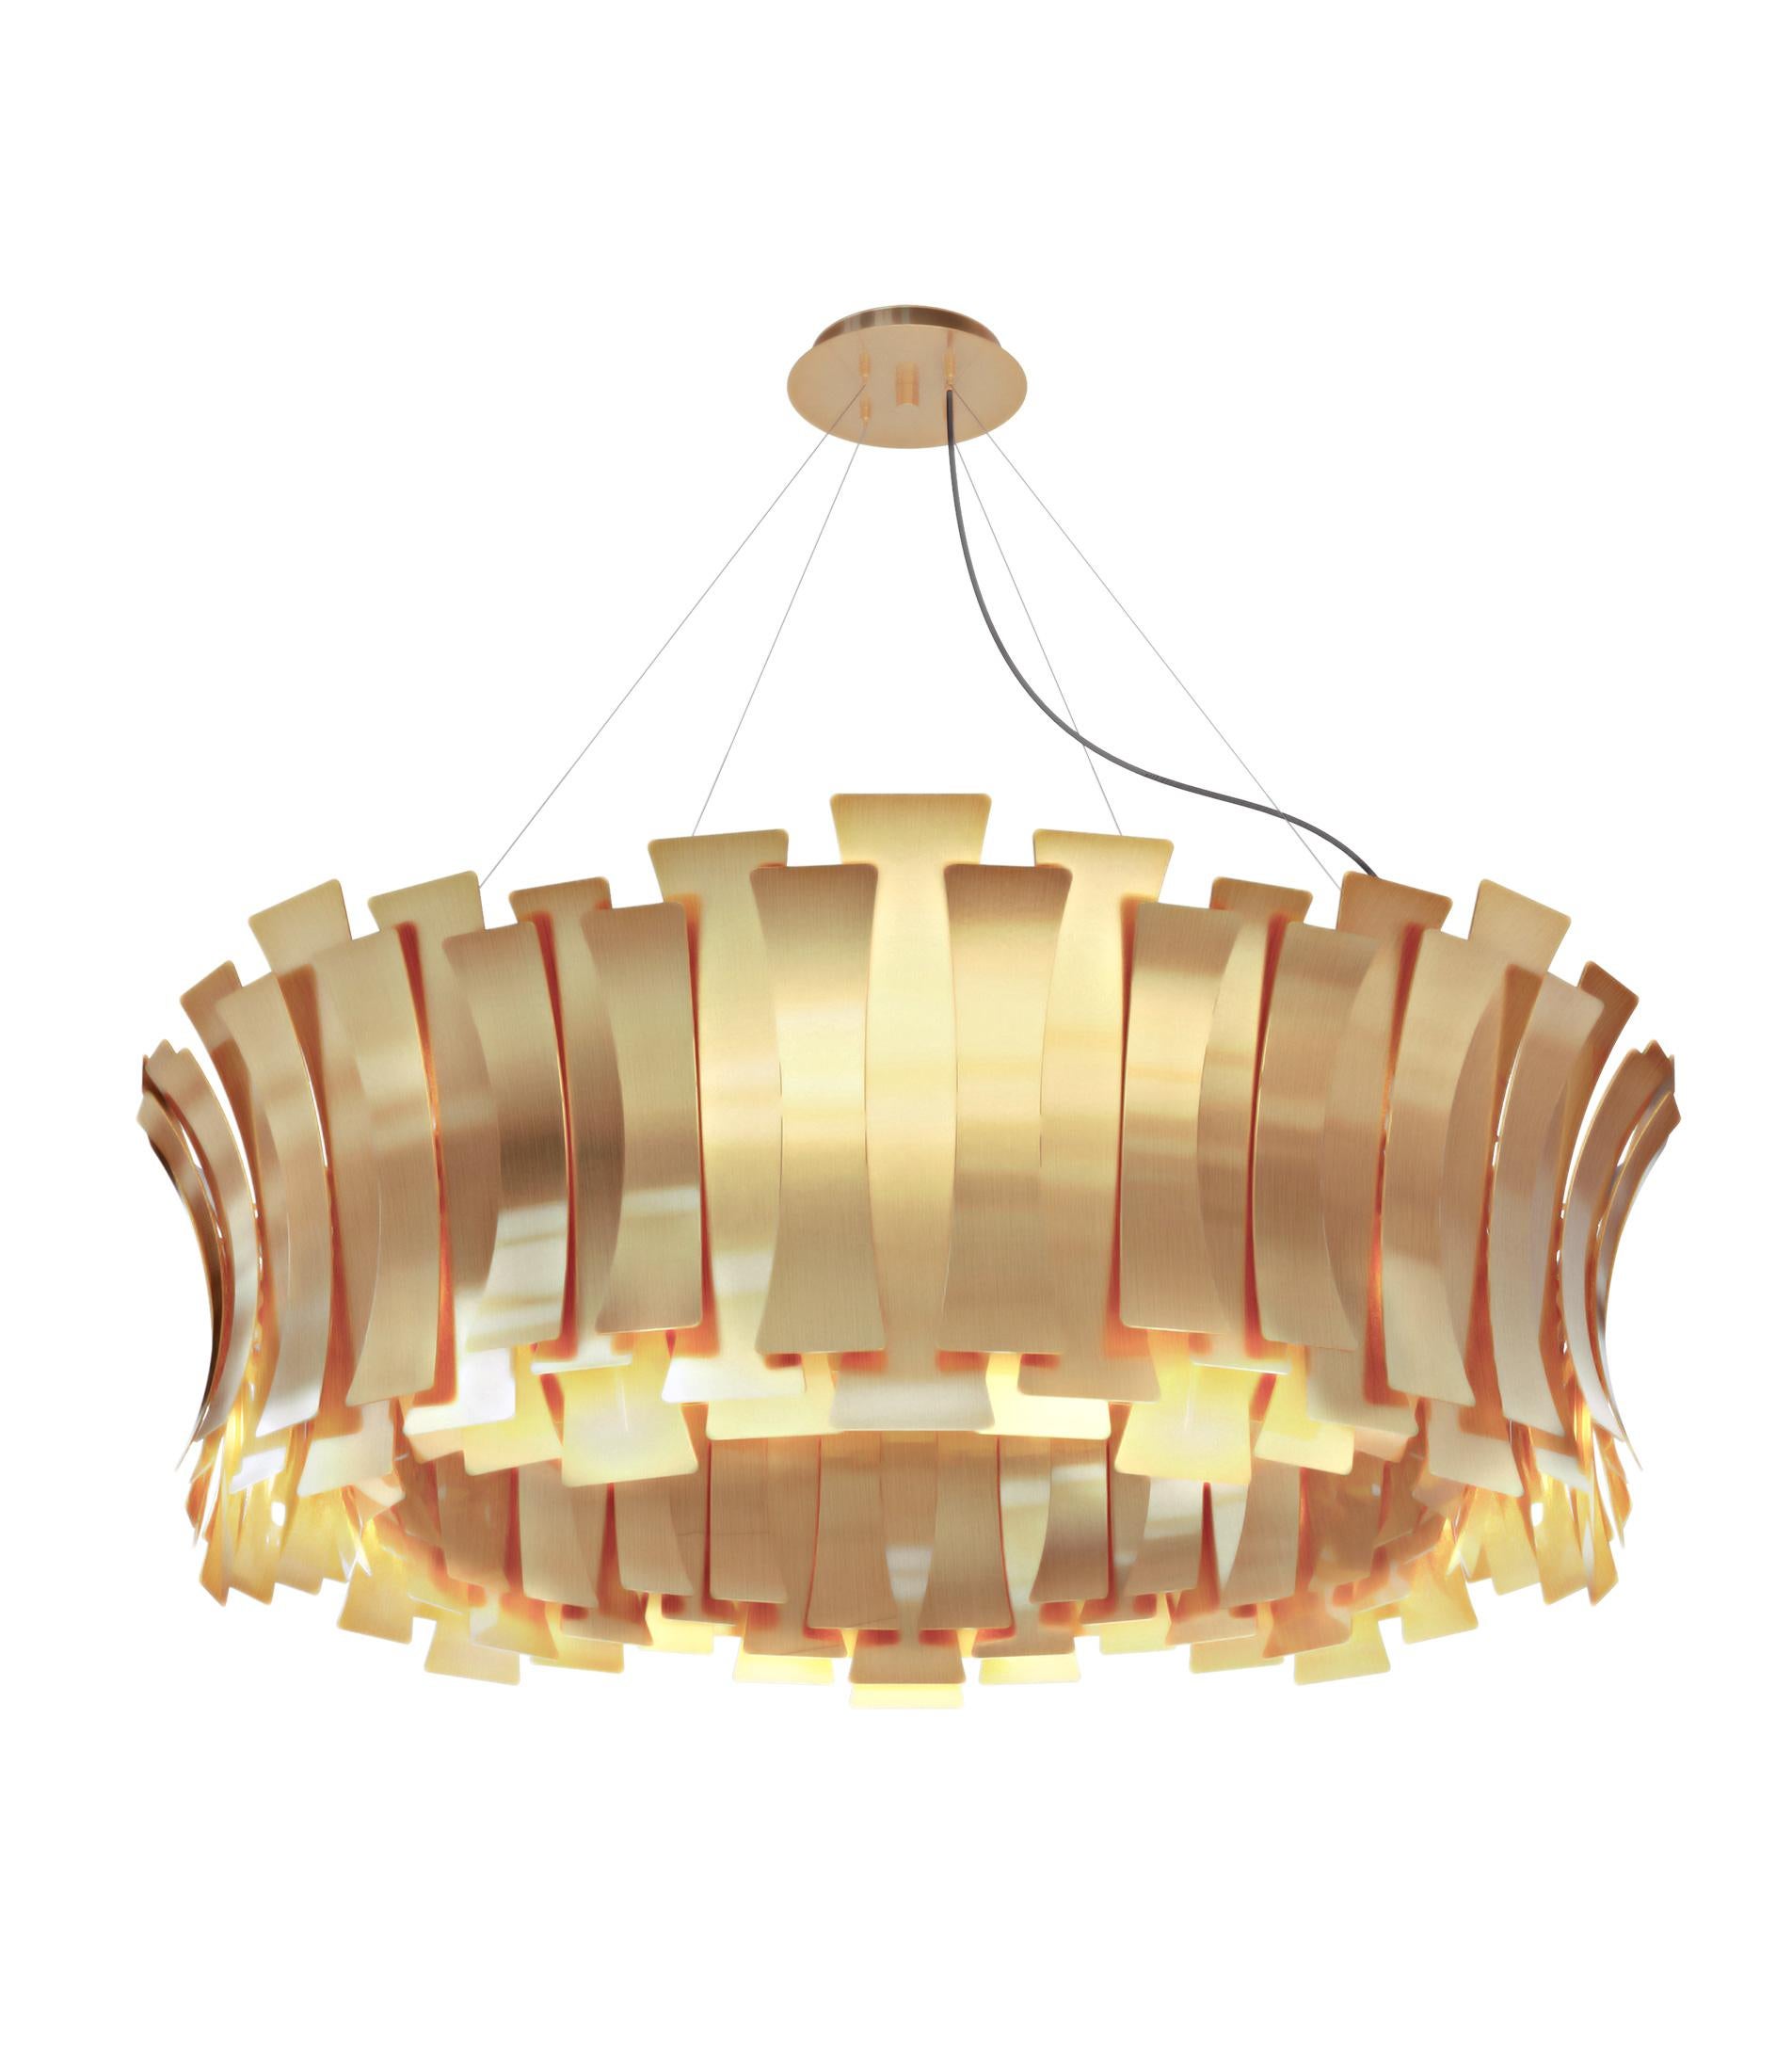 Inspired by the feminine glow cast by one of the greatest jazz singers of all times, Delightfull has created Etta round chandelier. It is a sophisticated and very functional chandelier lighting design suited for the most luxurious settings you can